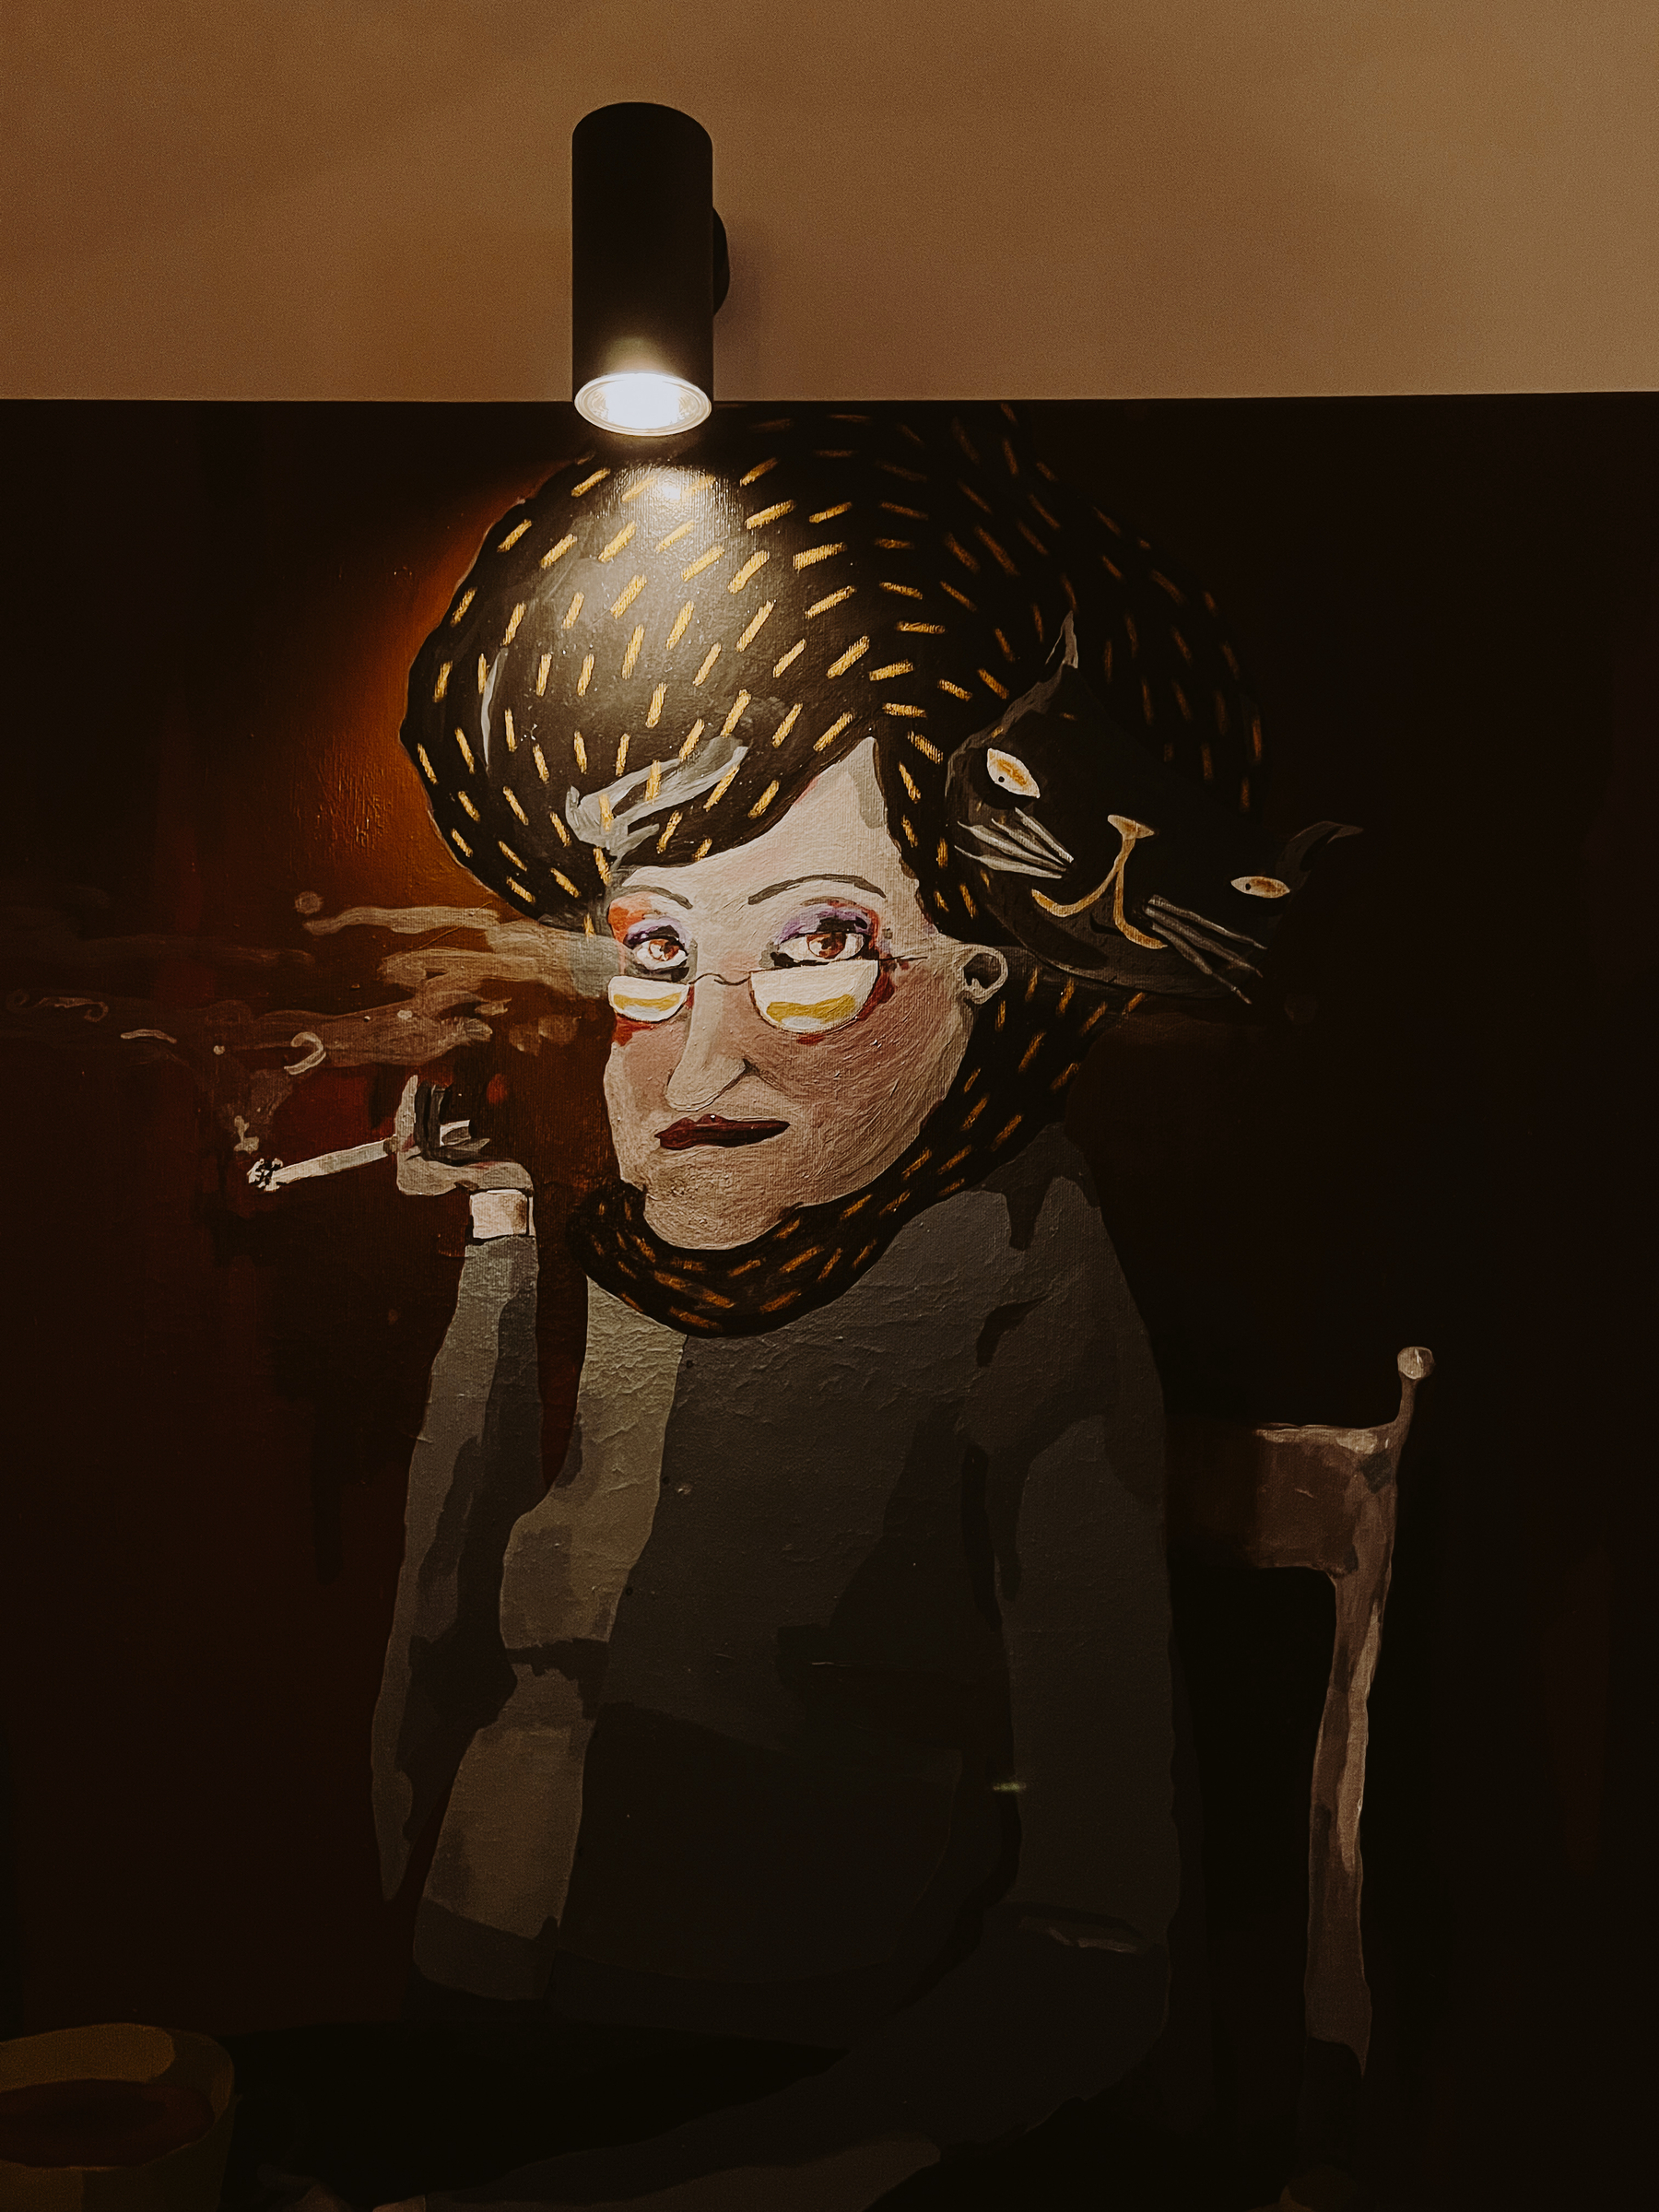 Painting of a woman with glasses smoking a cigarette, under a spotlight, with a stylized cat in her hair.